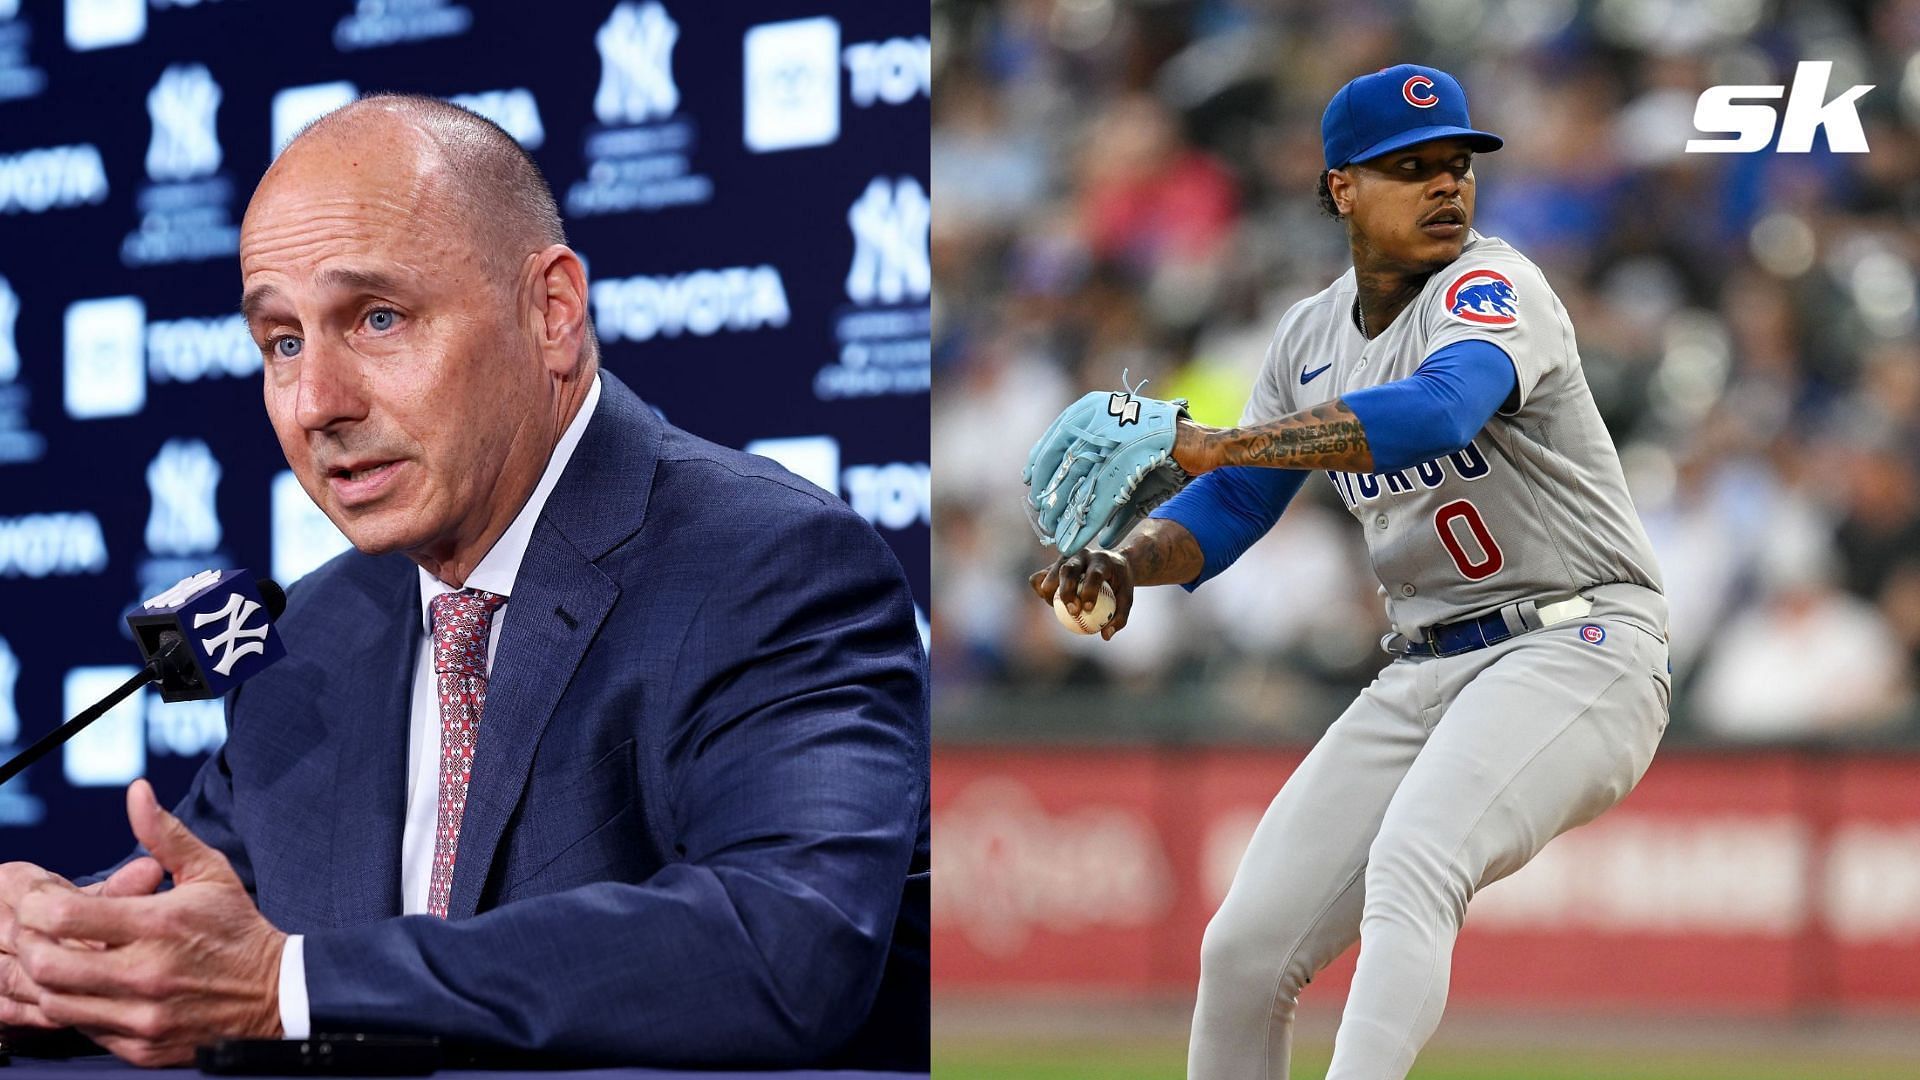 Marcus Stroman says that he an New York Yankees GM Brian Cashman cleared the air over previous feud